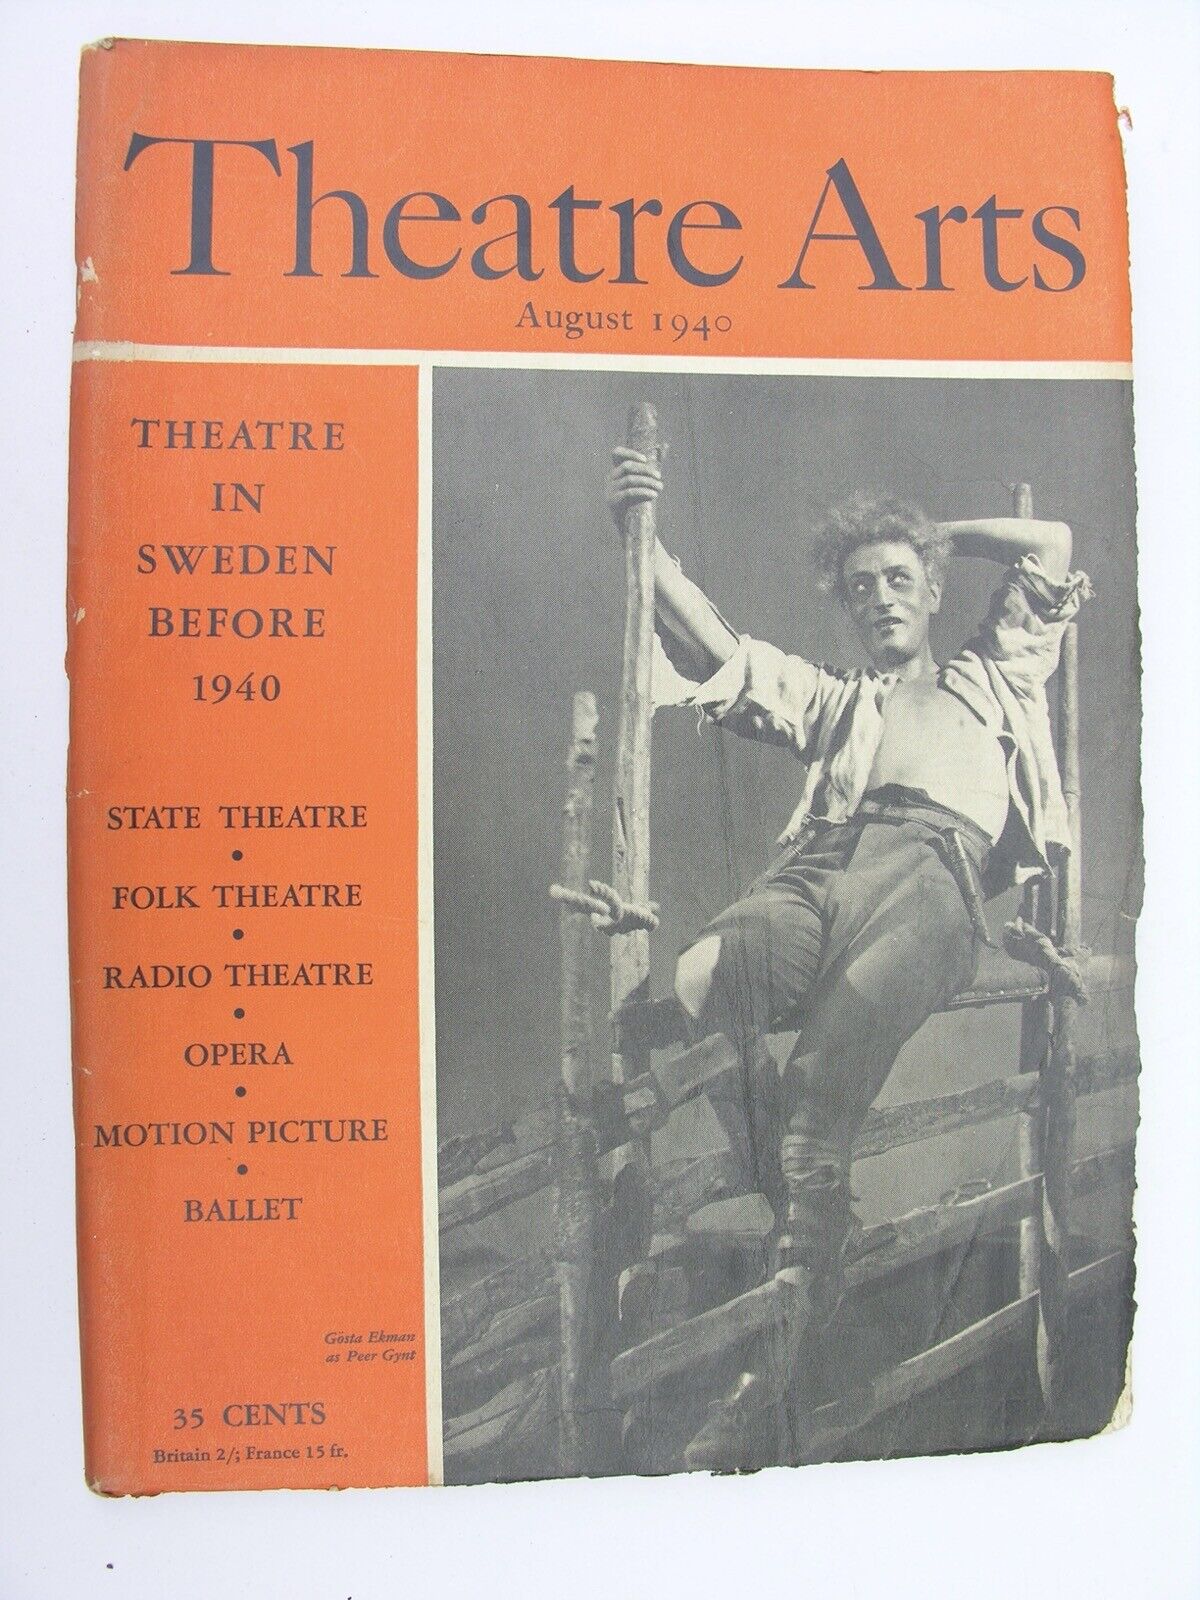 THEATRE ARTS MONTHLY August 1940 Anders de Wahl Swedish Drama August Strindberg